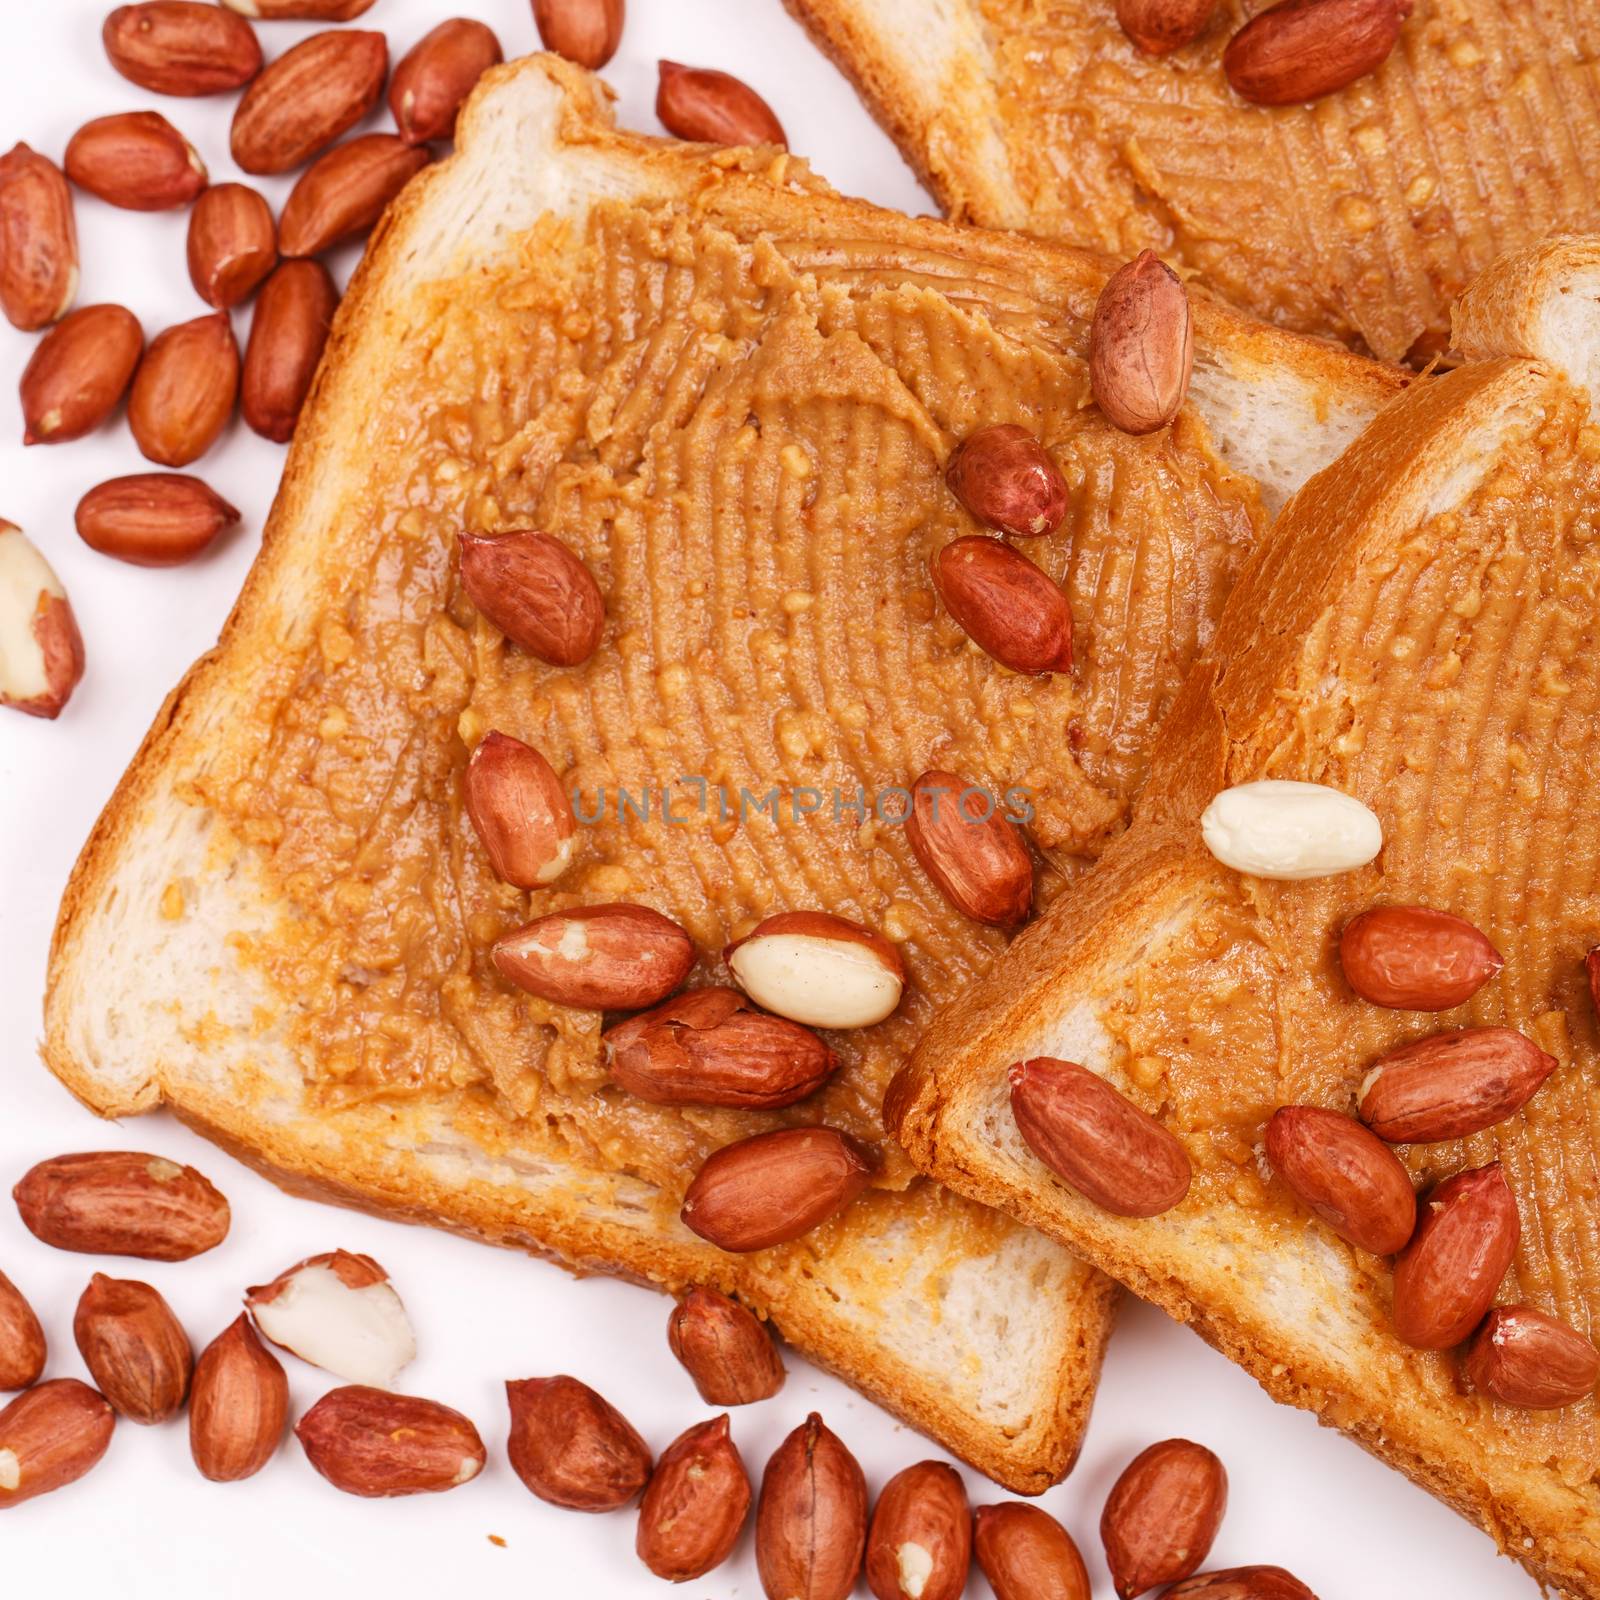 Peanut butter sandwich with heap of peanuts on the table